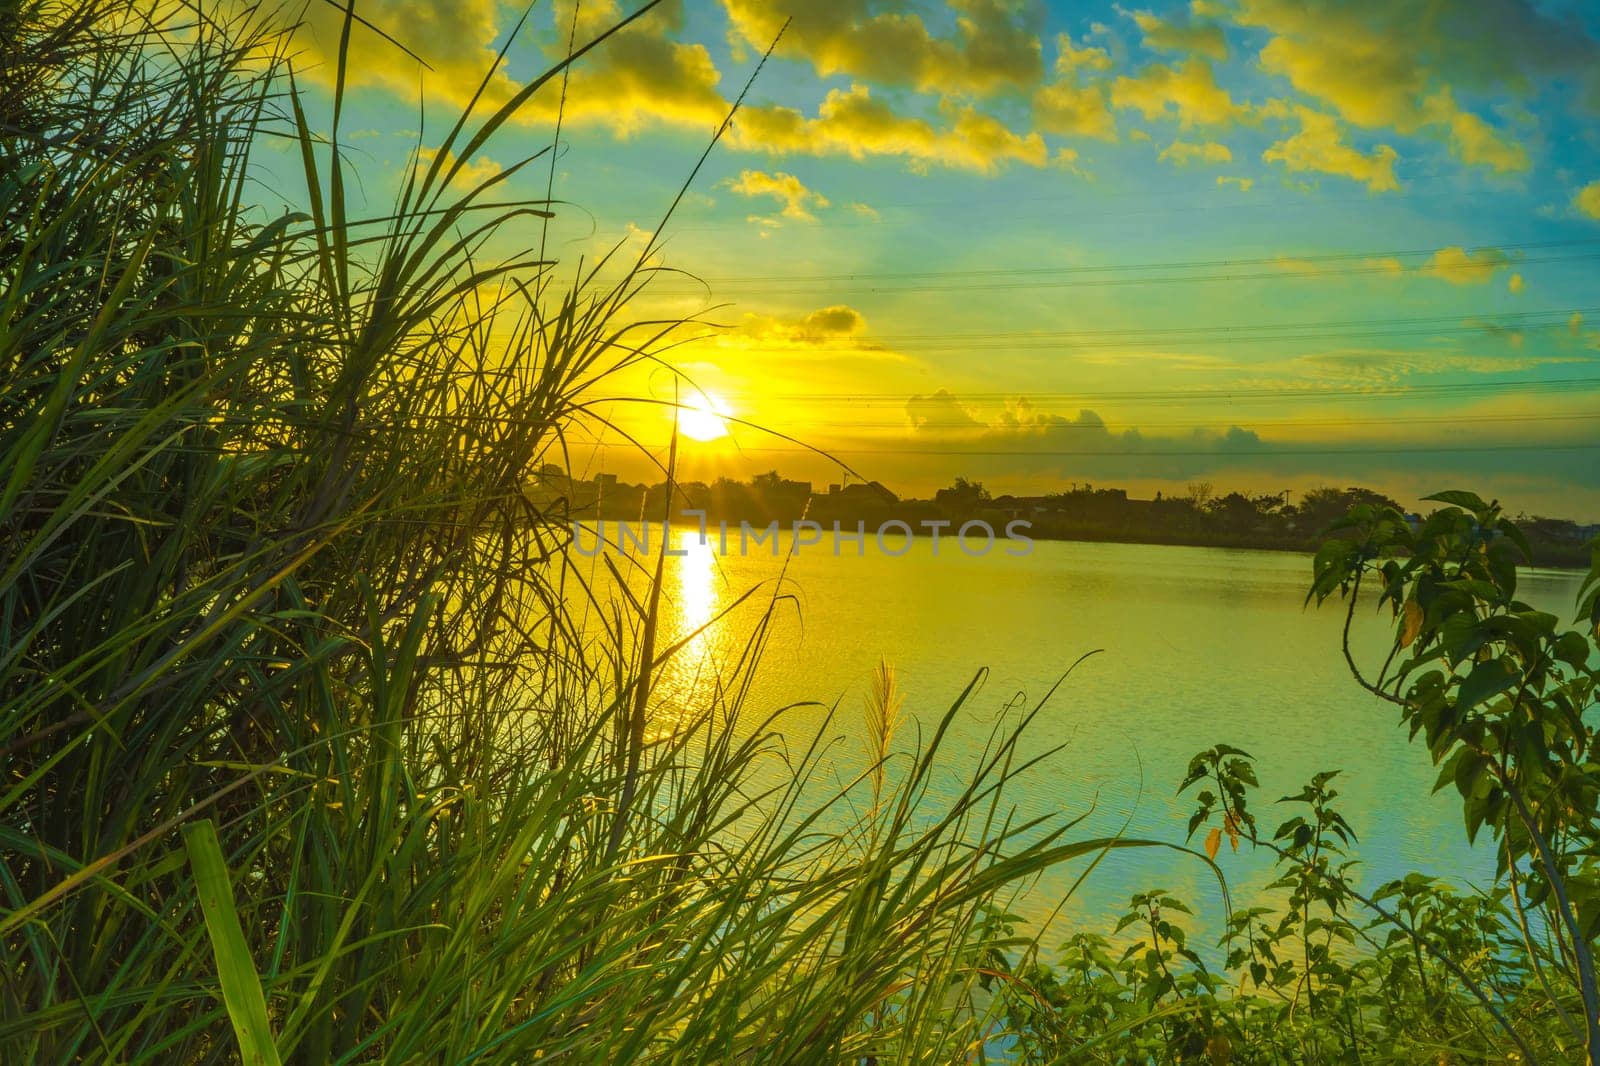 Sunset over the lake with trees and grass as foreground in Surabaya, Indonesia.